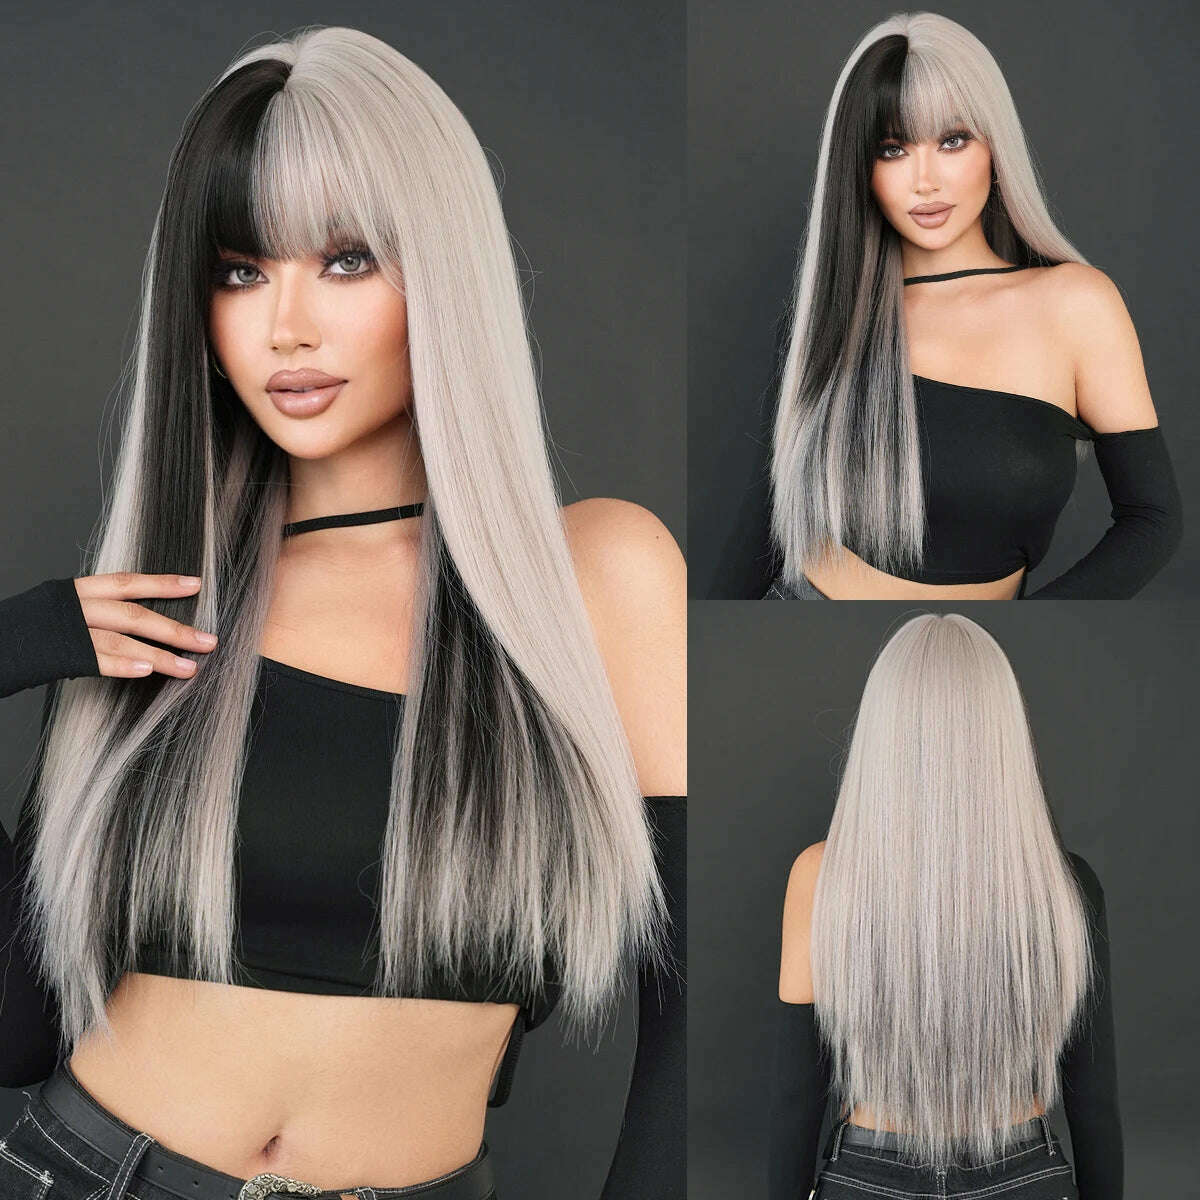 KIMLUD, NAMM Long Body Straight Silver Ash Hair Wig With Bangs For Women Daily Party High Density Hair Ombre Wigs Heat Resistant Fiber, MW9160-1, KIMLUD Womens Clothes